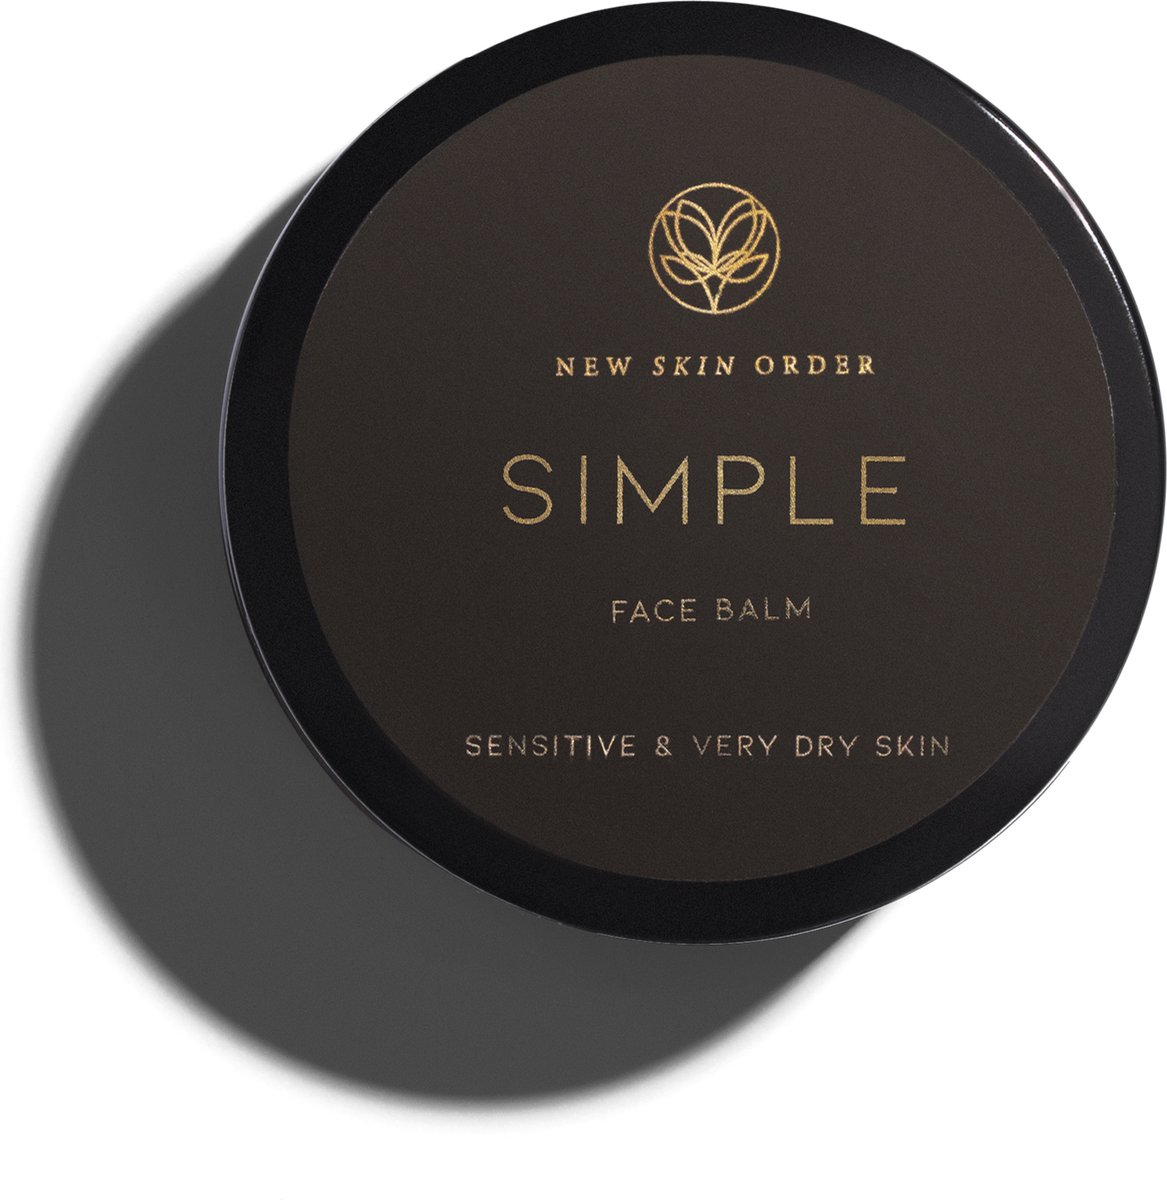 New Skin Order Simple Face balm botanical product